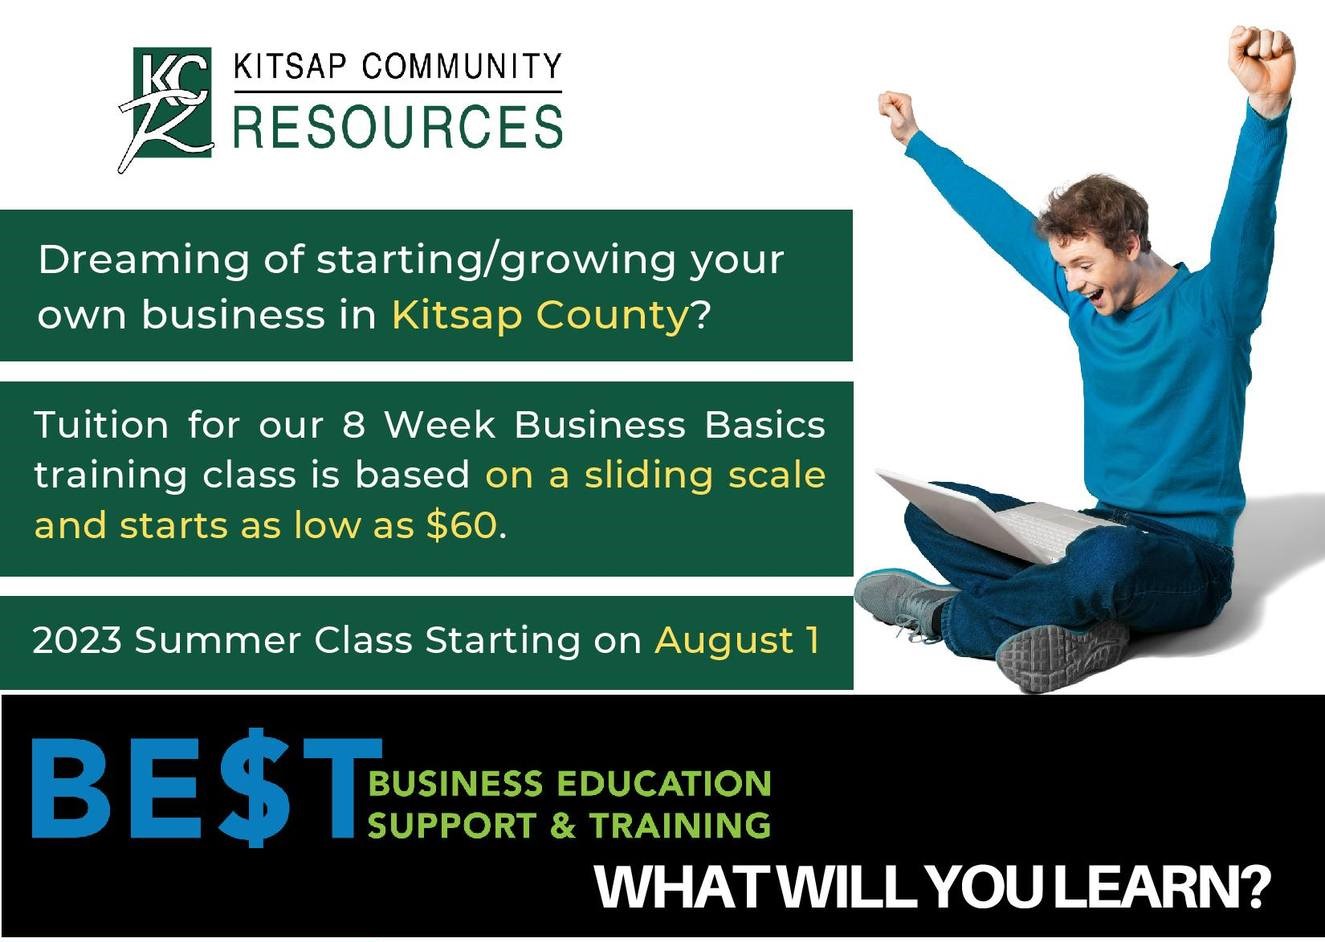 Business Educations Support & Training summer class is starting on August 1. Photo